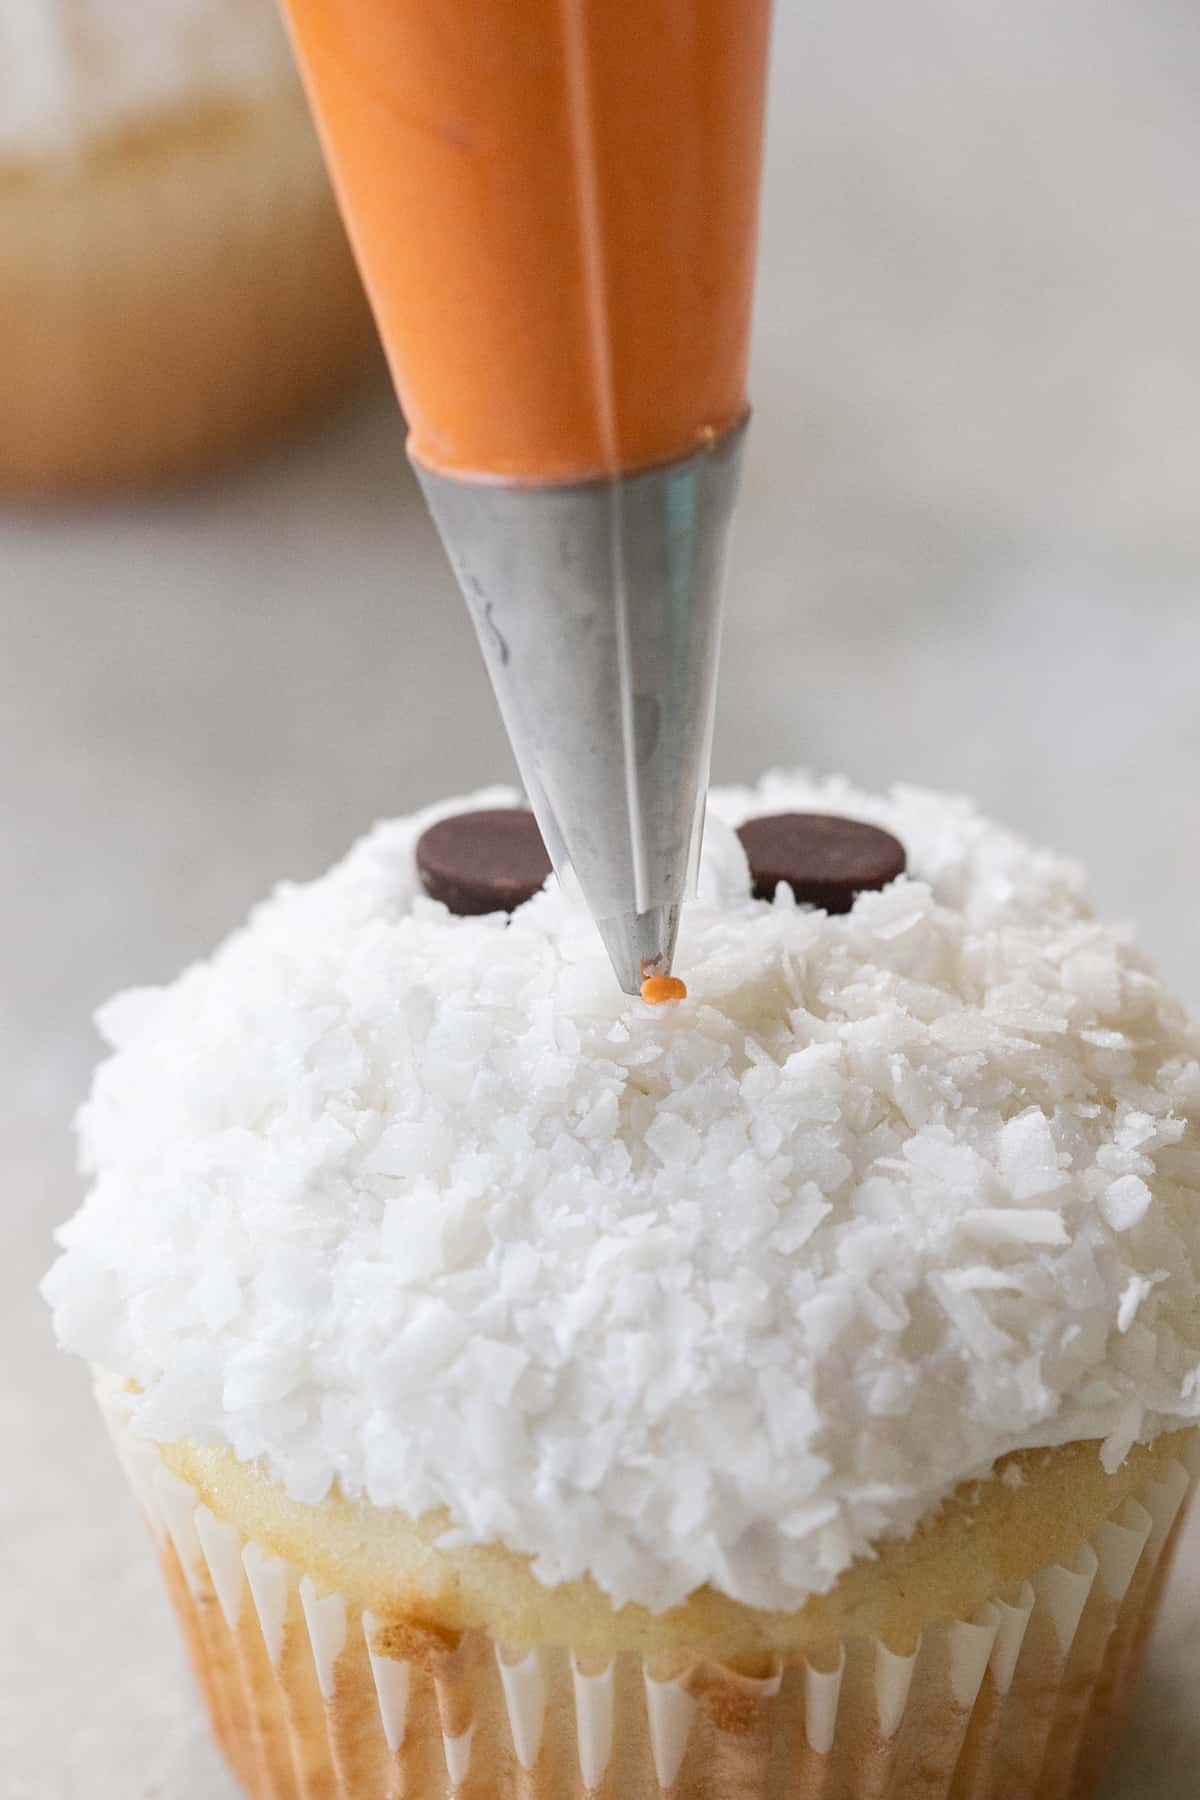 Making a small orange carrot nice with frosting.